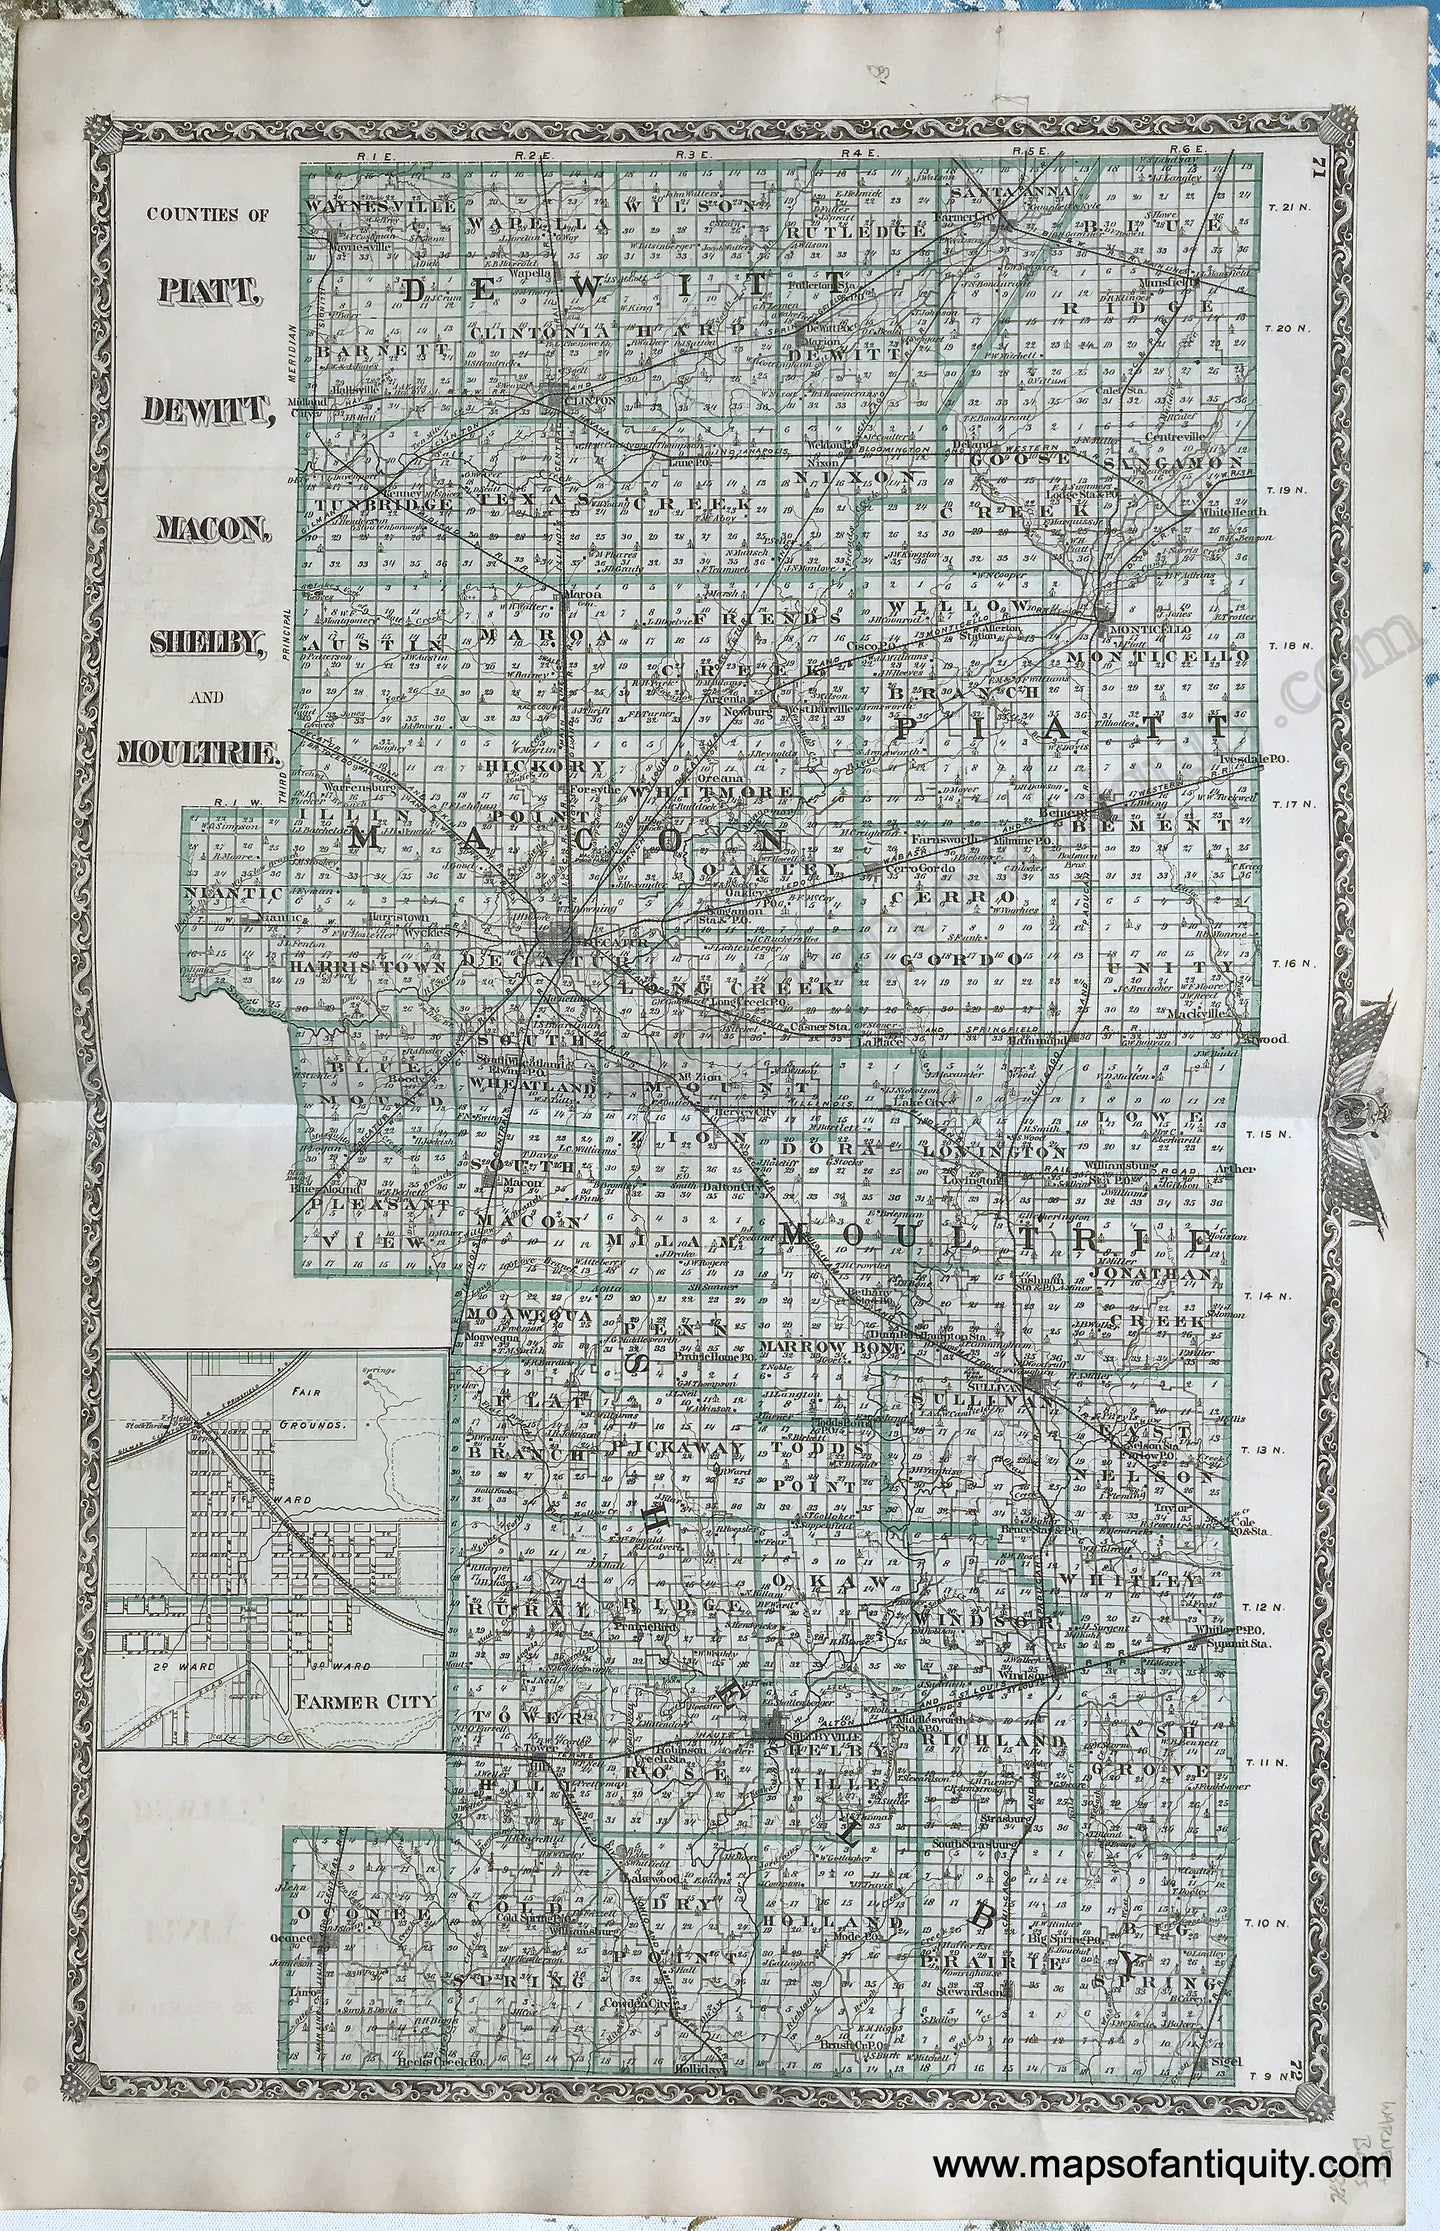 Antique-Hand-Colored-Map-Double-sided-sheet-with-multiple-maps:-Centerfold---Counties-of-Piatt-Dewitt-Macon-Shelby-and-Moultrie;-versos:-Coles-County-/-Douglas-County-and-Cumberland-County-Illinois-1876-Warner-&-Beers-/-Union-Atlas-Co.-Midwest-1800s-19th-century-Maps-of-Antiquity